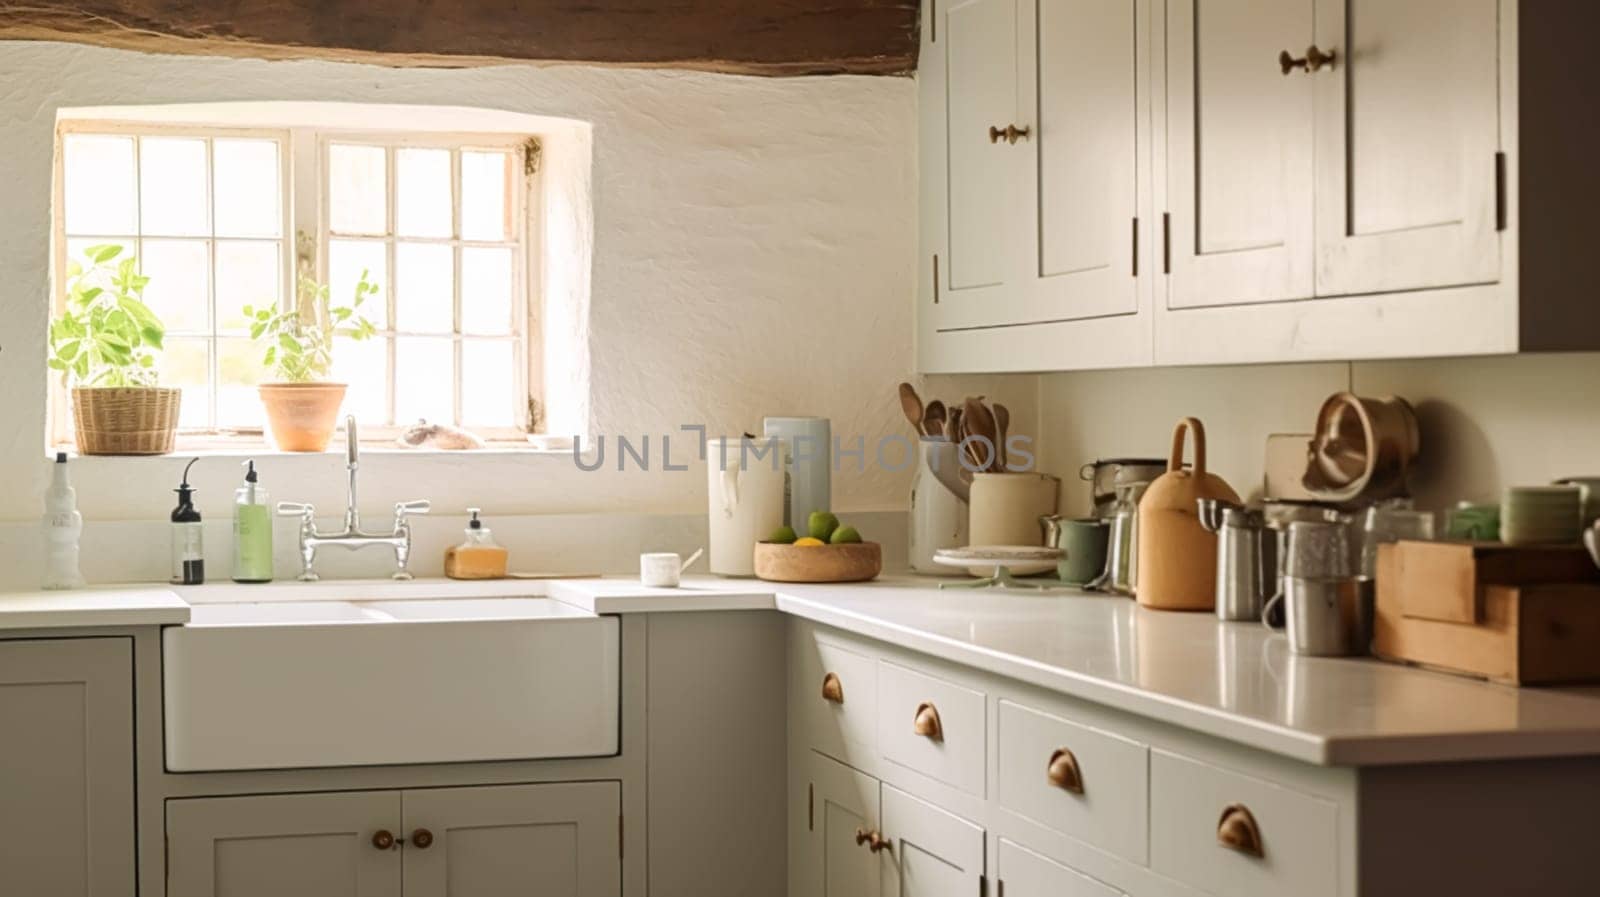 Farmhouse kitchen decor and interior design, English in frame kitchen cabinets in a country house, elegant cottage style inspiration